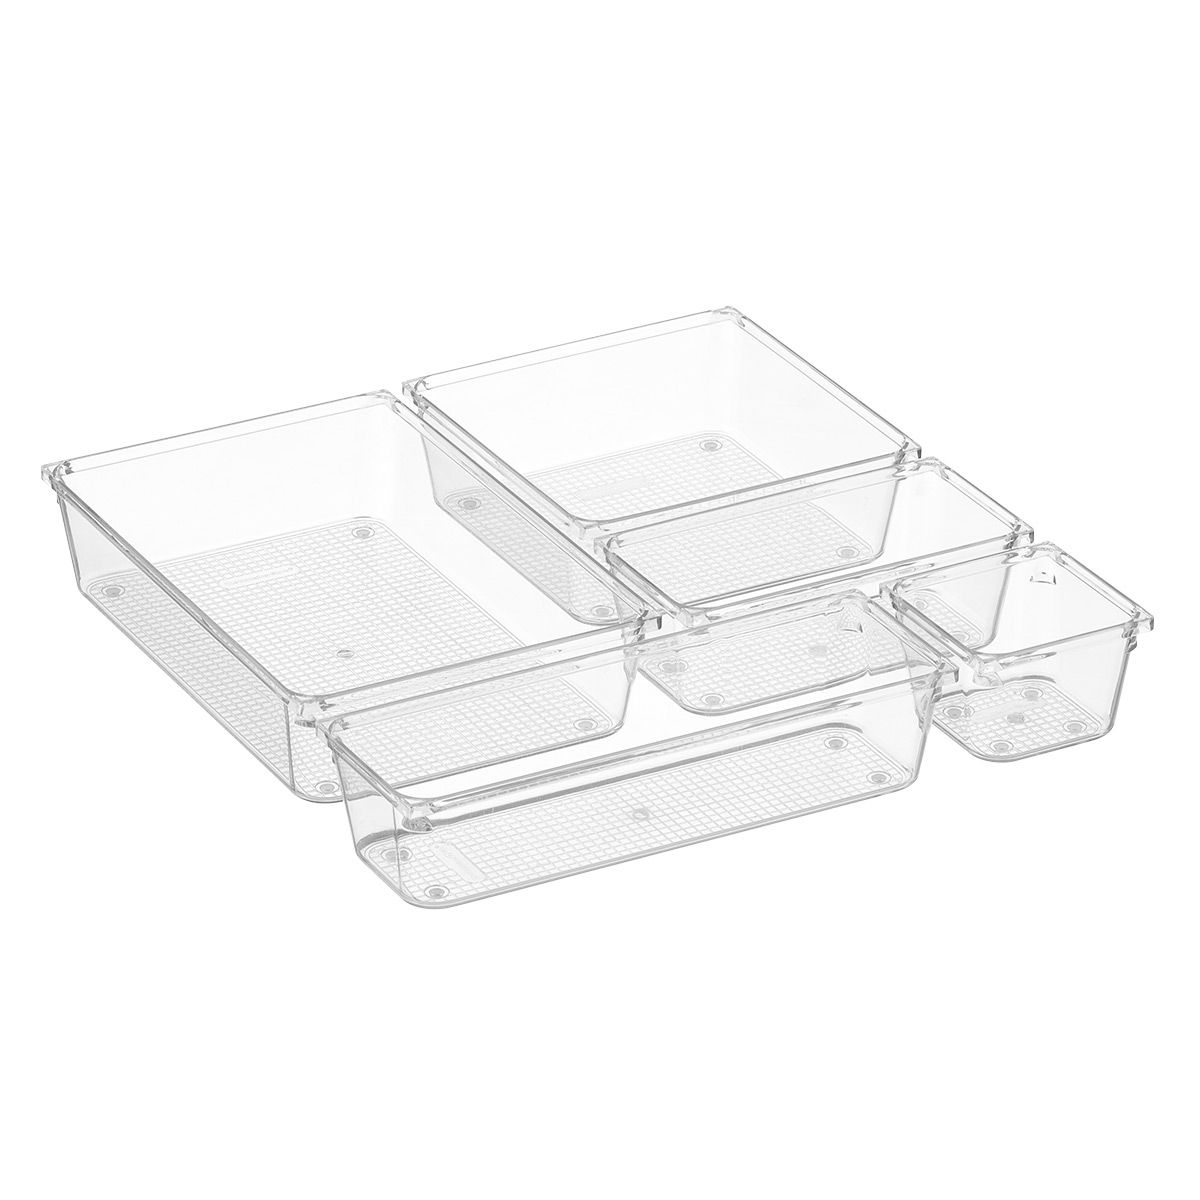 Everything Organizer Drawer Organizers Set of 5 | The Container Store